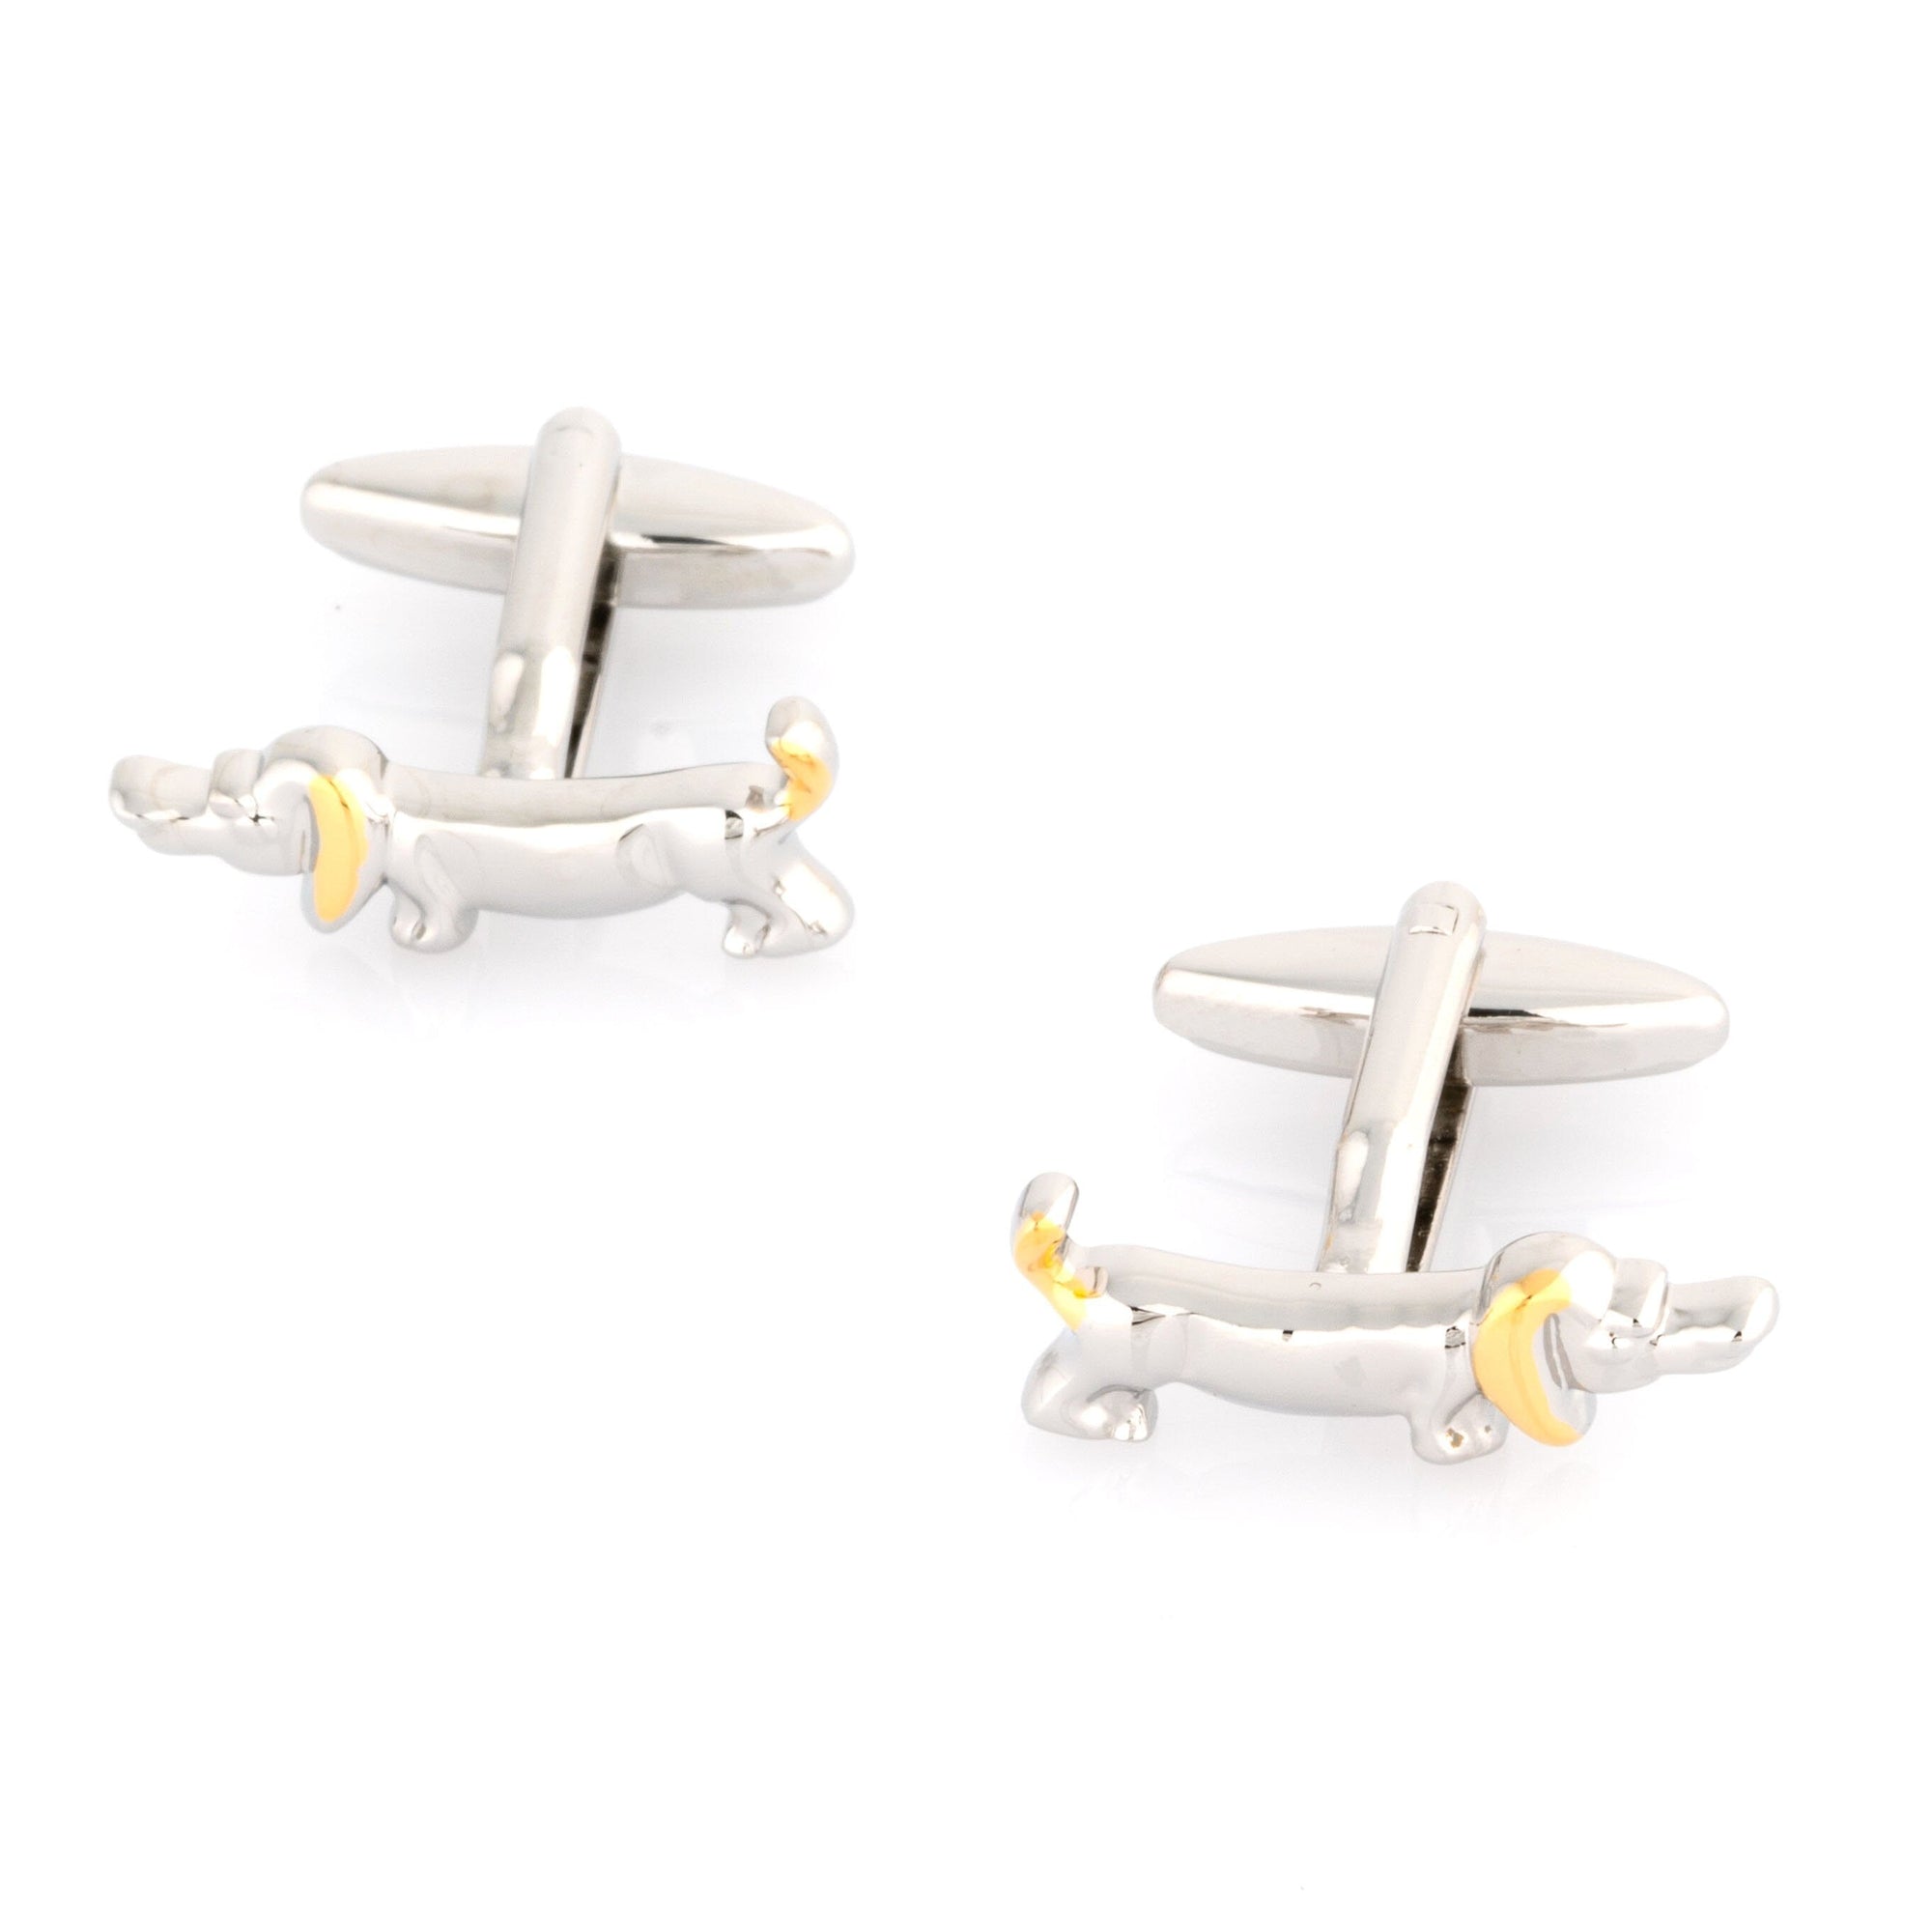 Sausage Dog Cufflinks in Gold and Silver Novelty Cufflinks Clinks Australia Sausage Dog Cufflinks in Gold and Silver 